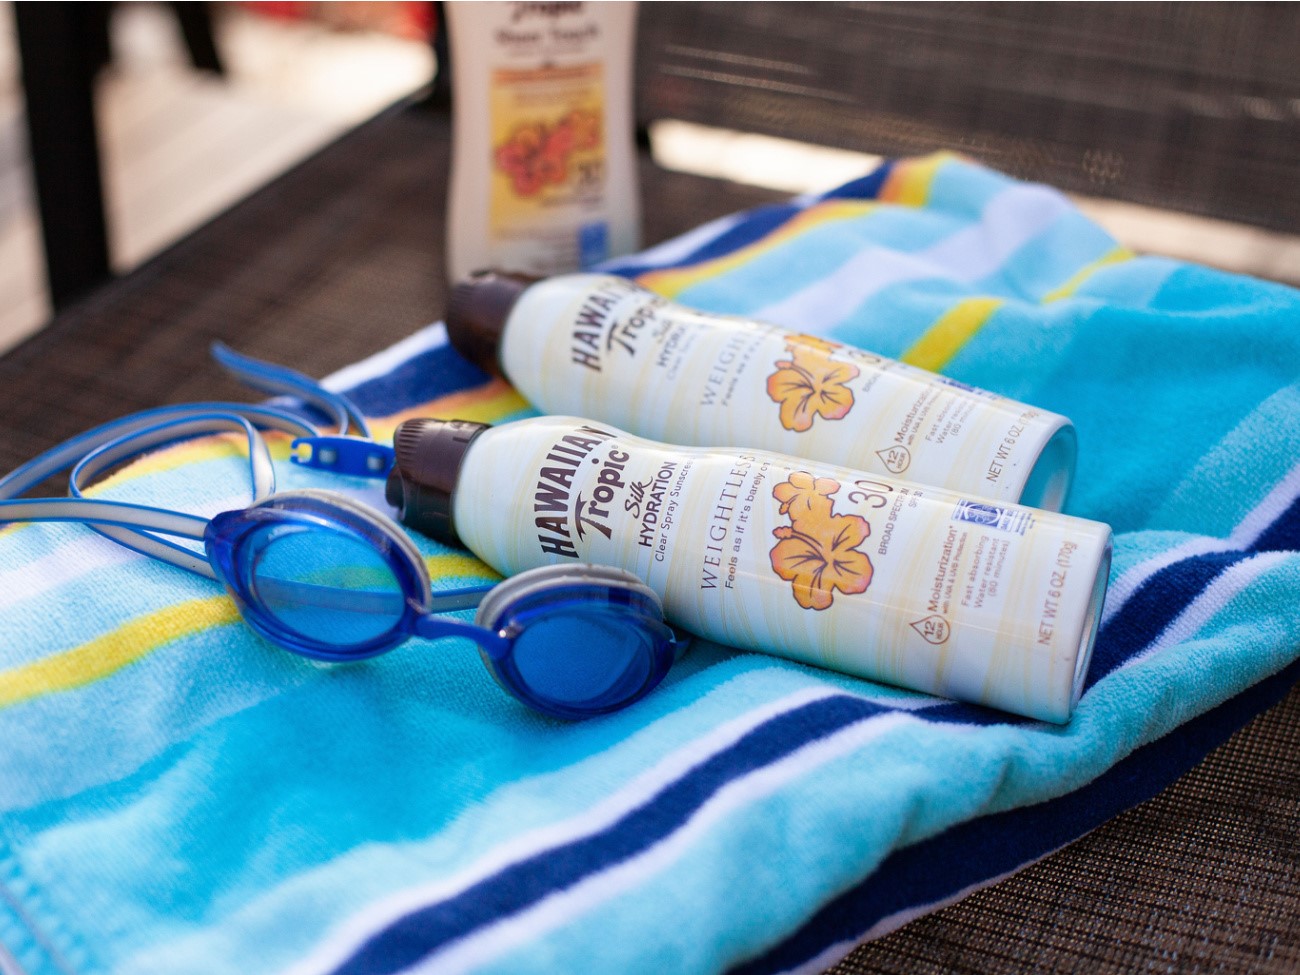 Hawaiian Tropic Suncare Products As Low As $4.99 At Publix